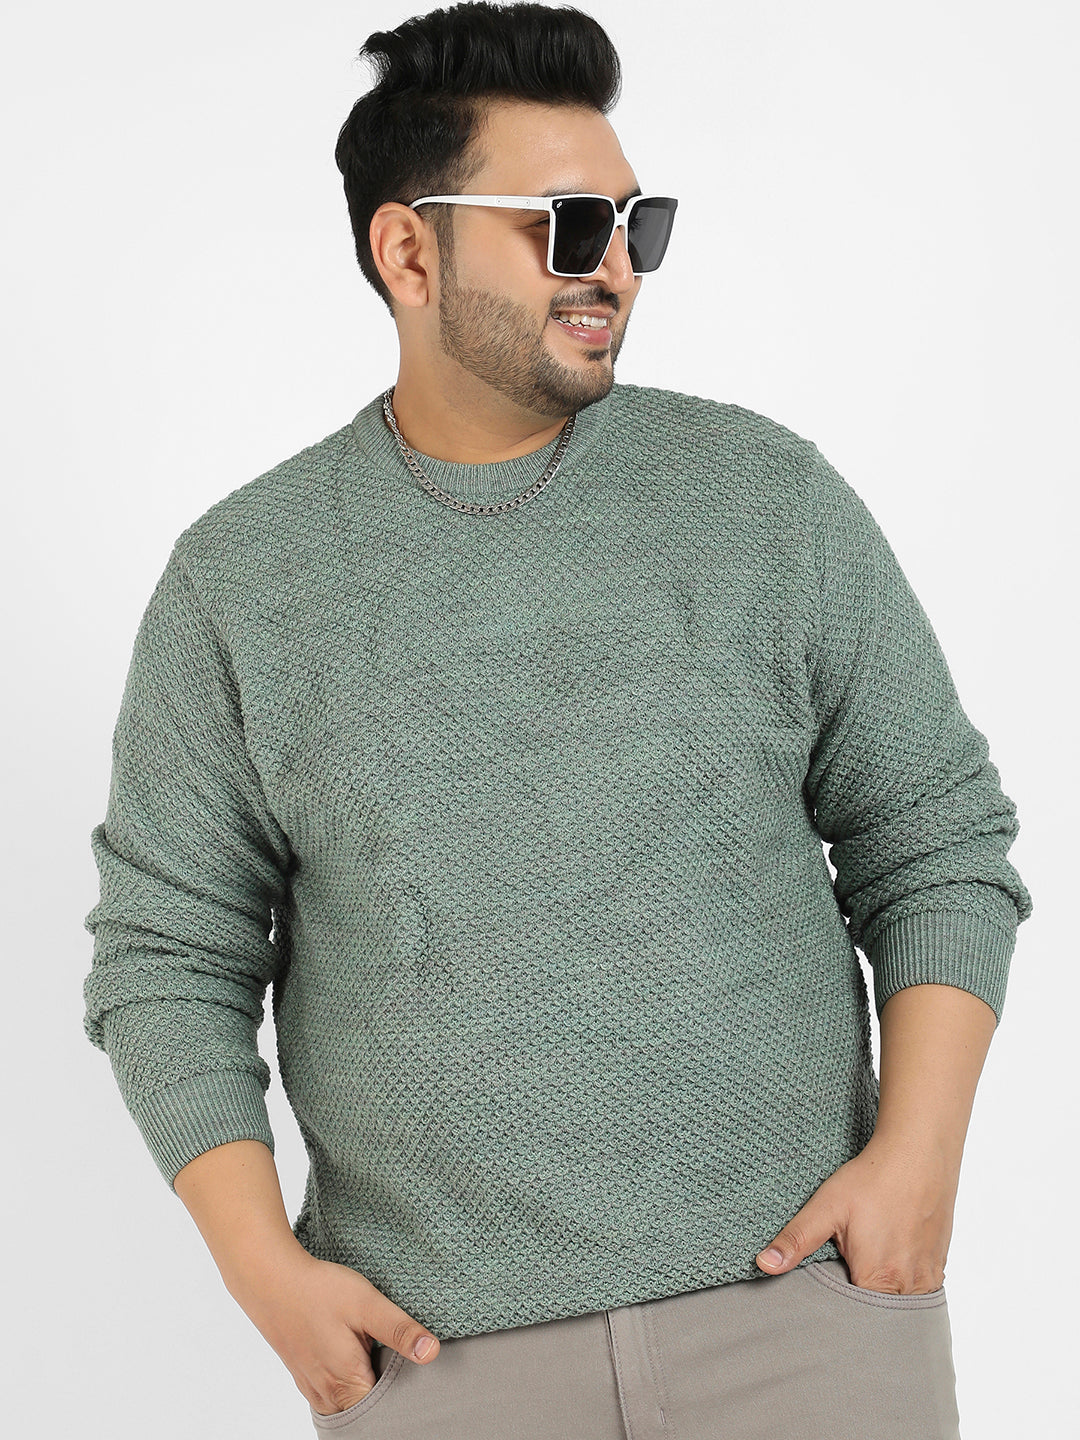 Olive Green Textured Knit Pullover Sweater